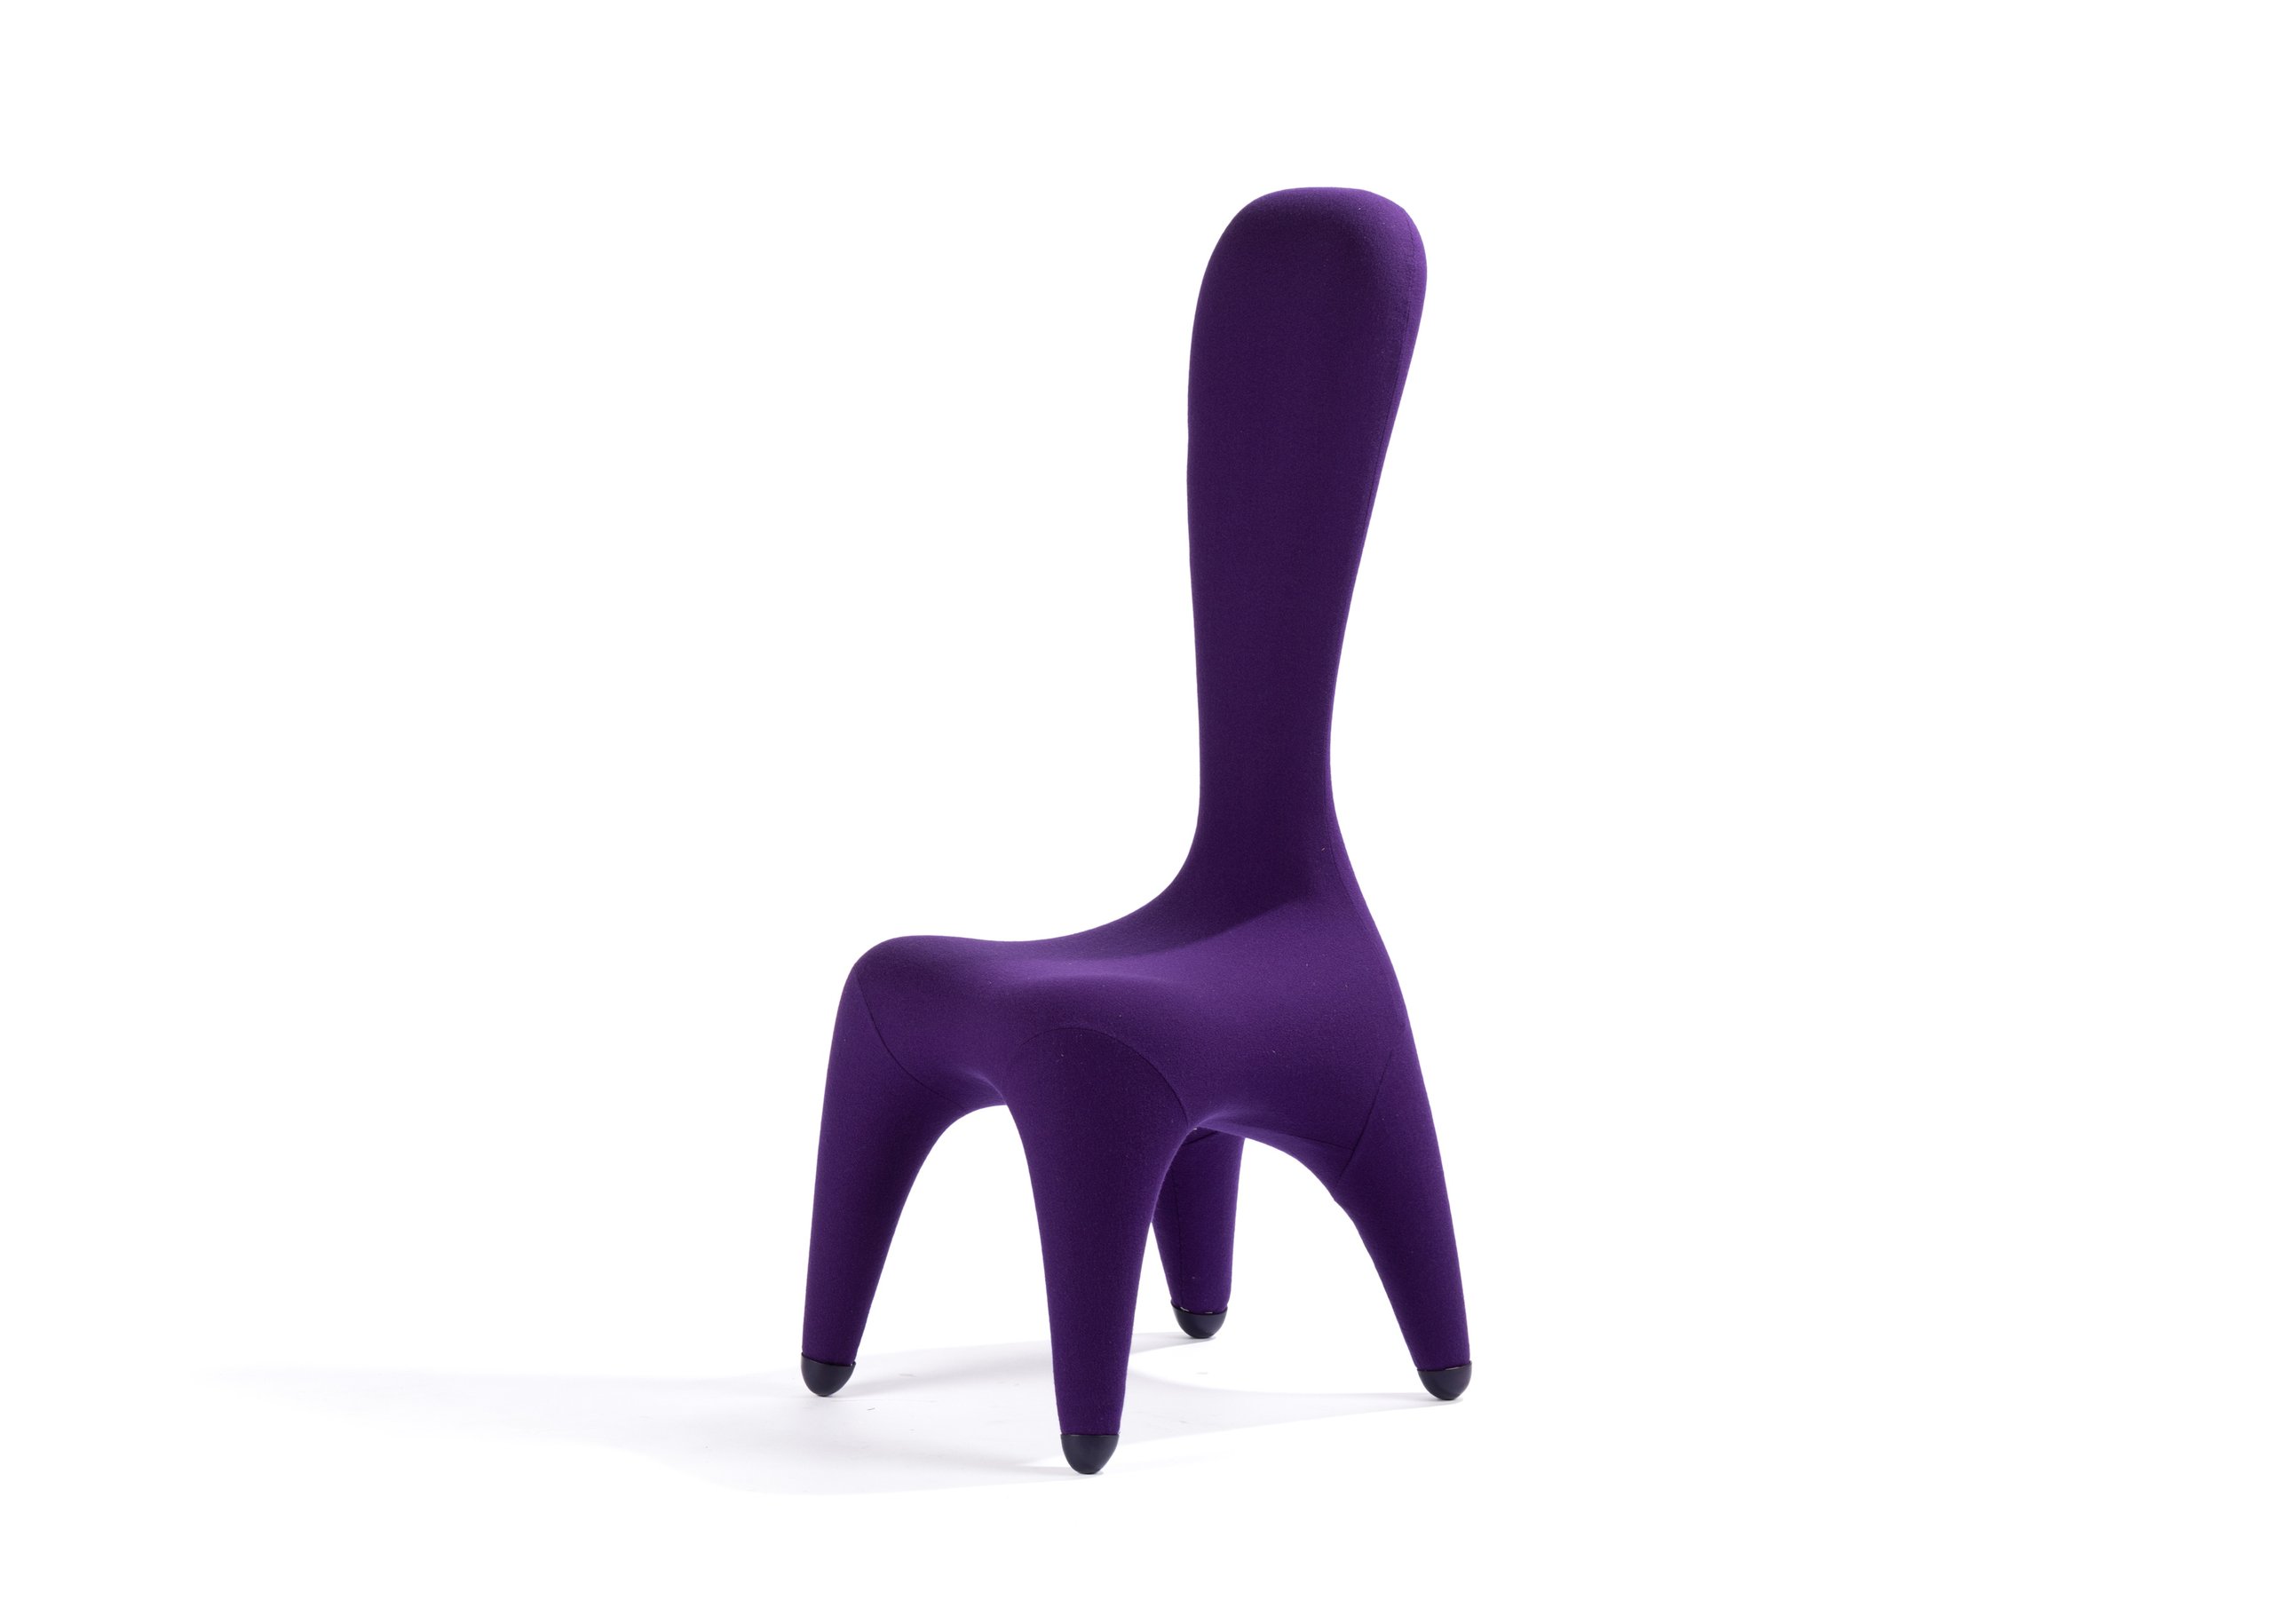 'Pepe' chair designed by Christopher Connell